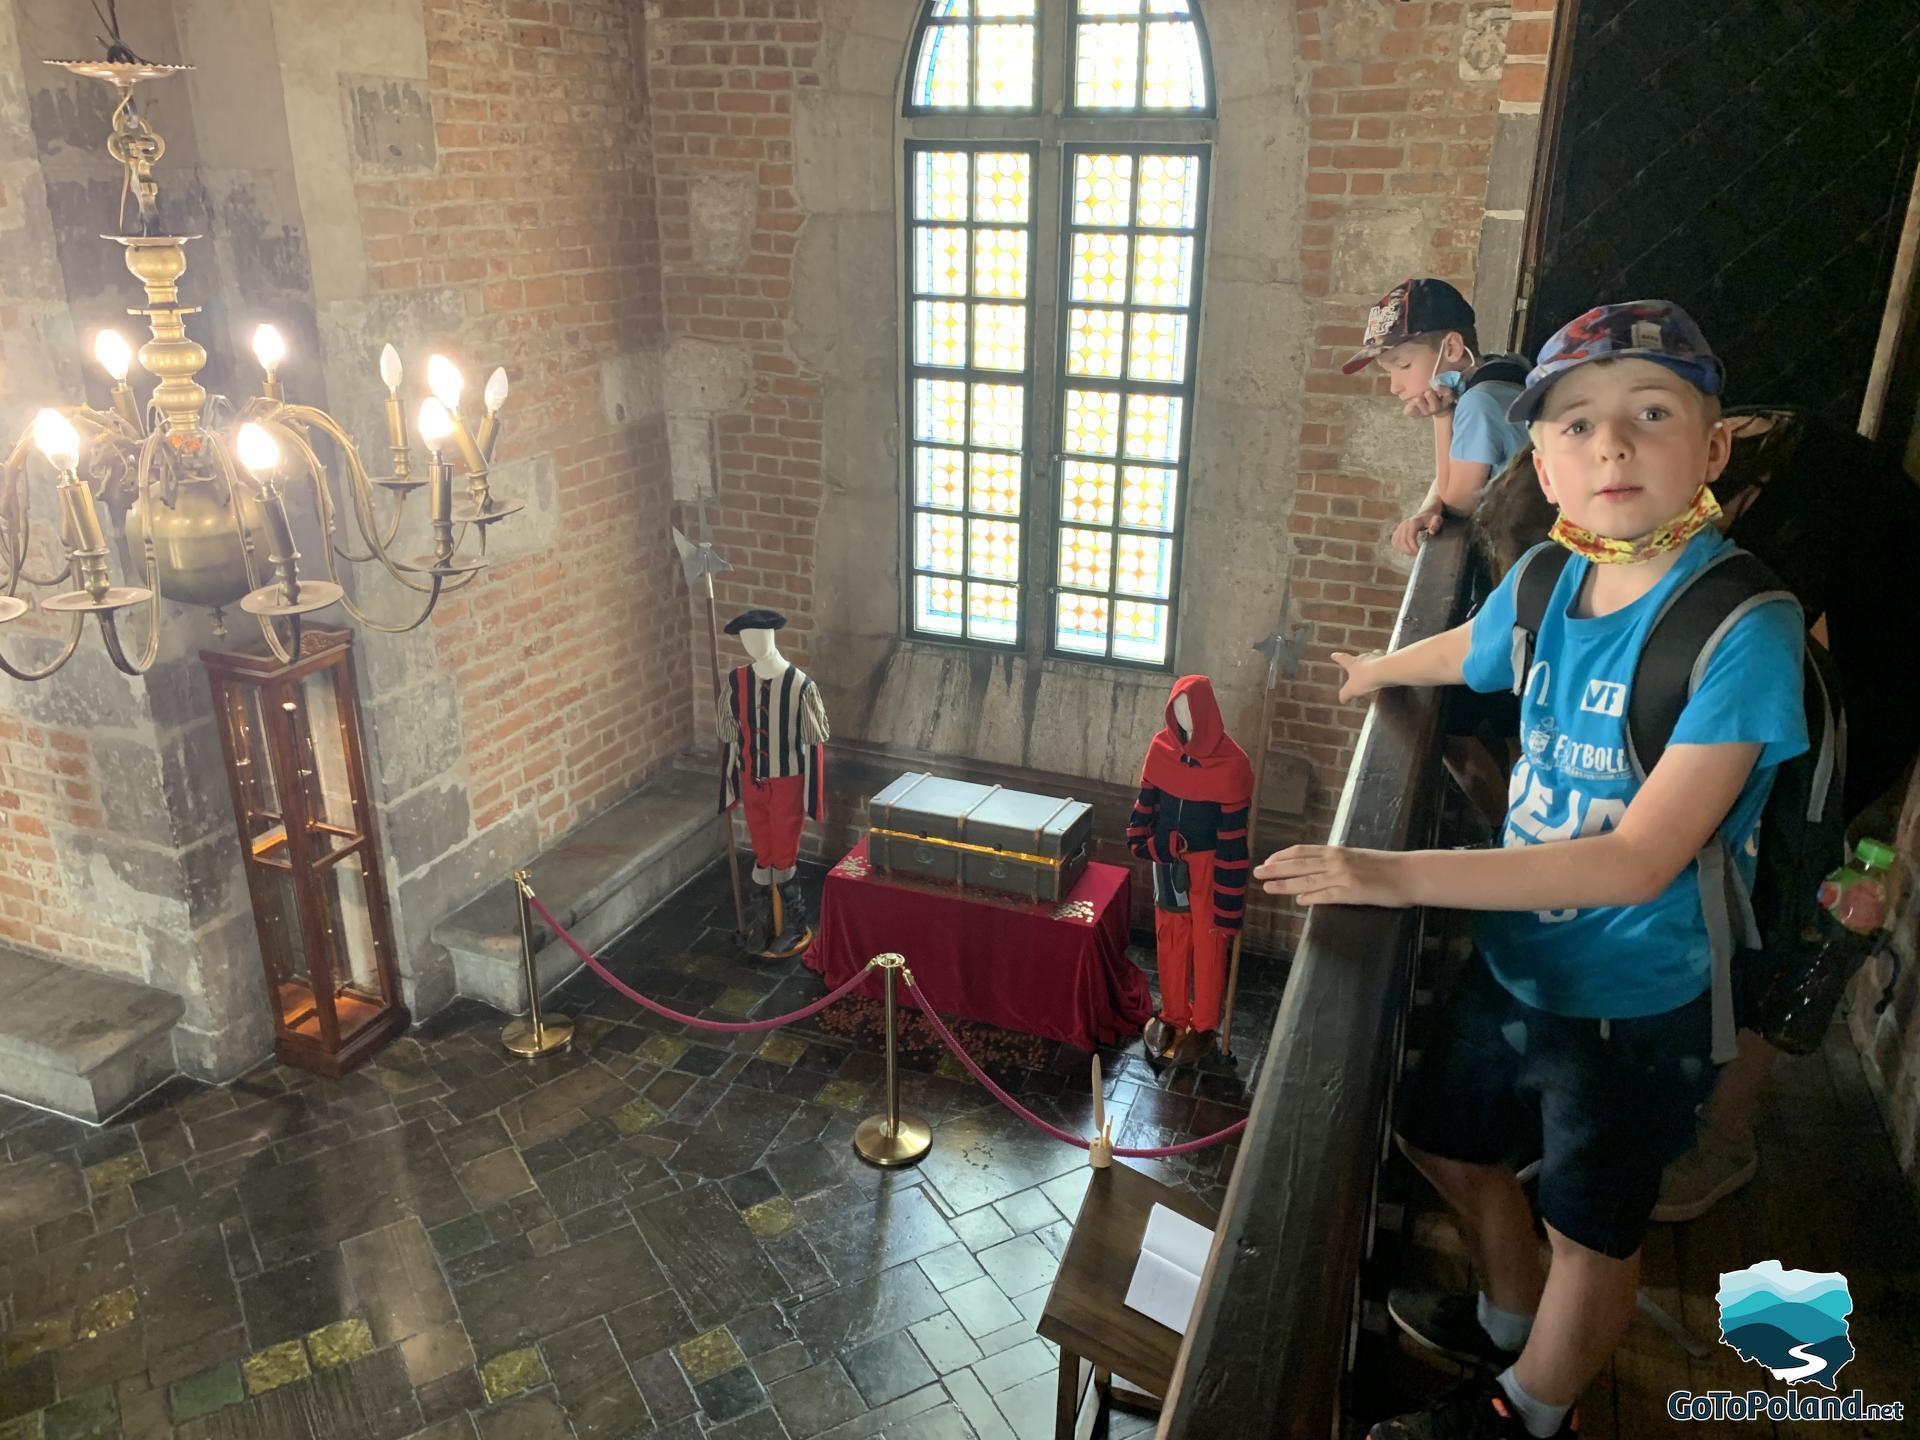 two boys watching exhibits in a tower (old clothes)